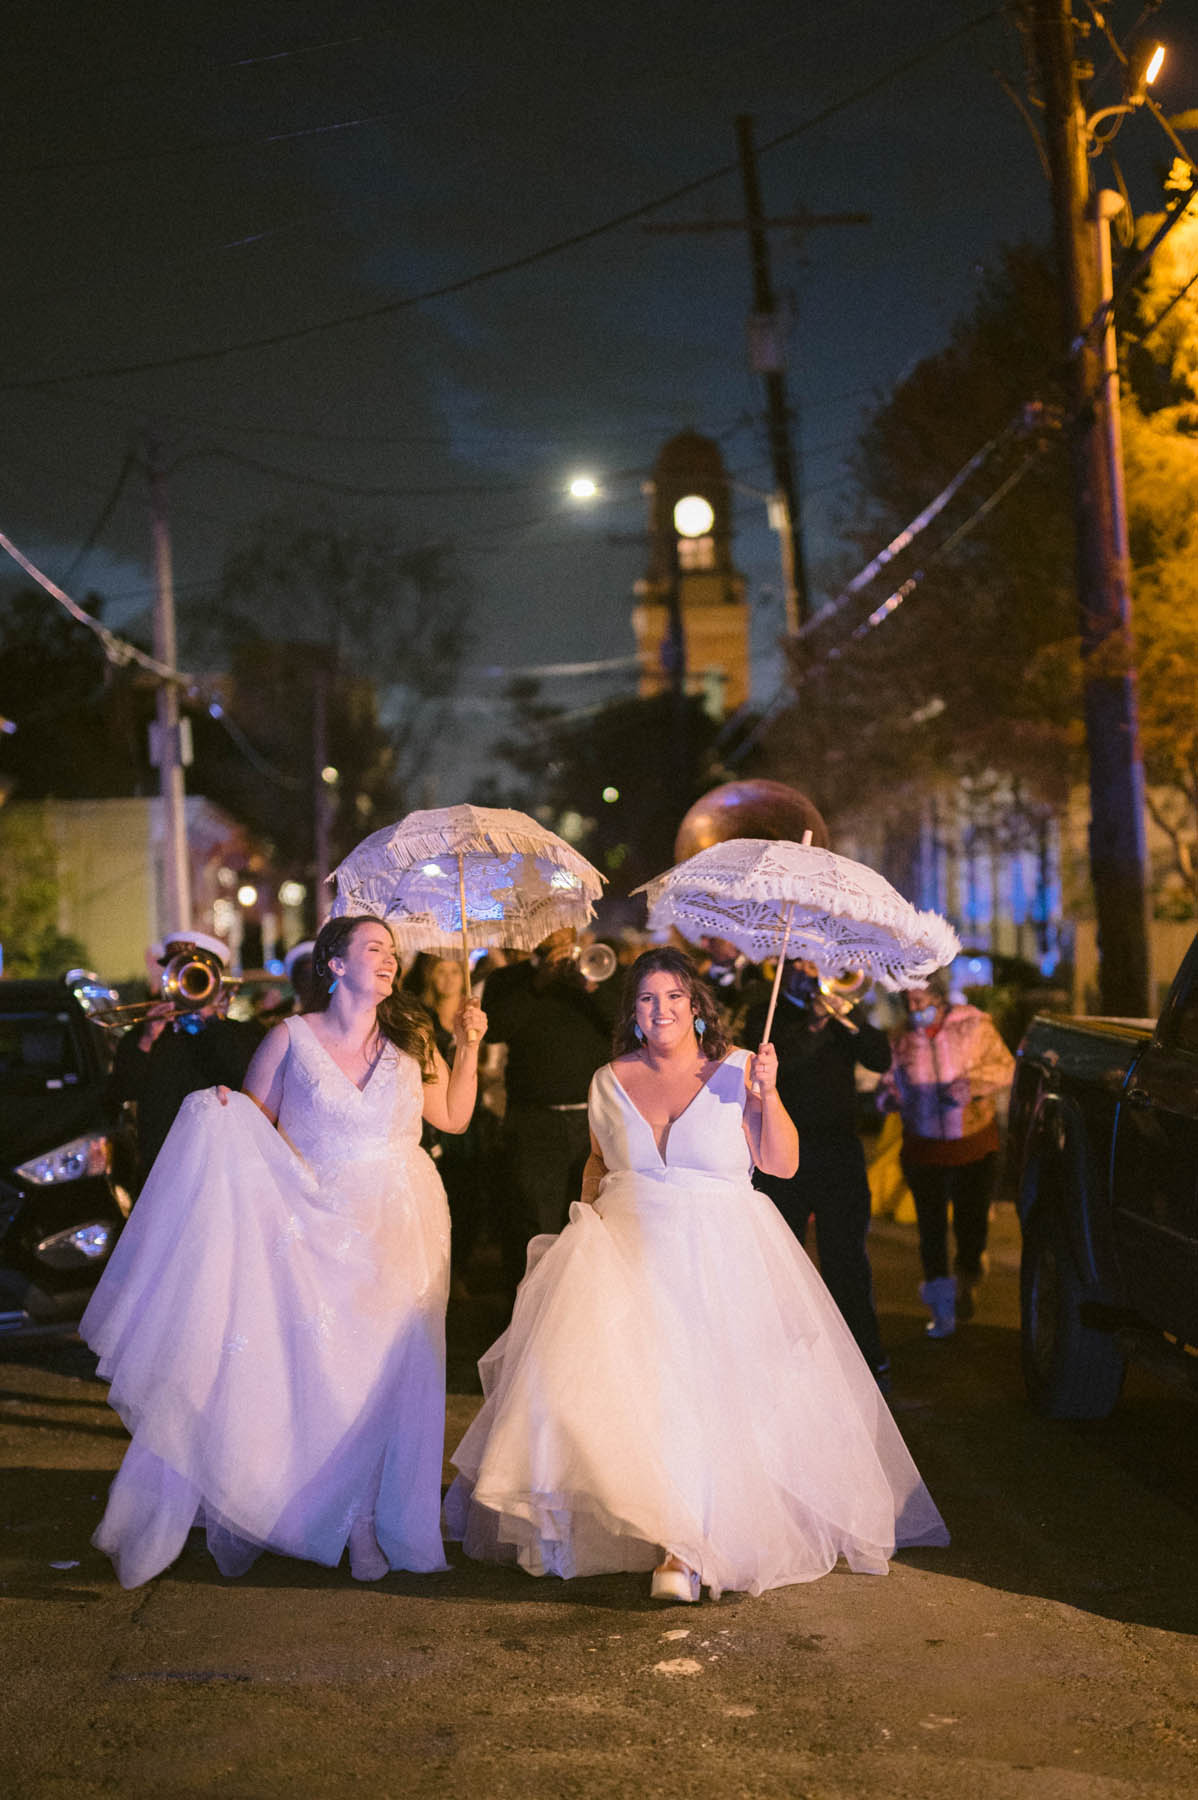 The newlyweds walk in front of a brass band through the trees of NOLA.